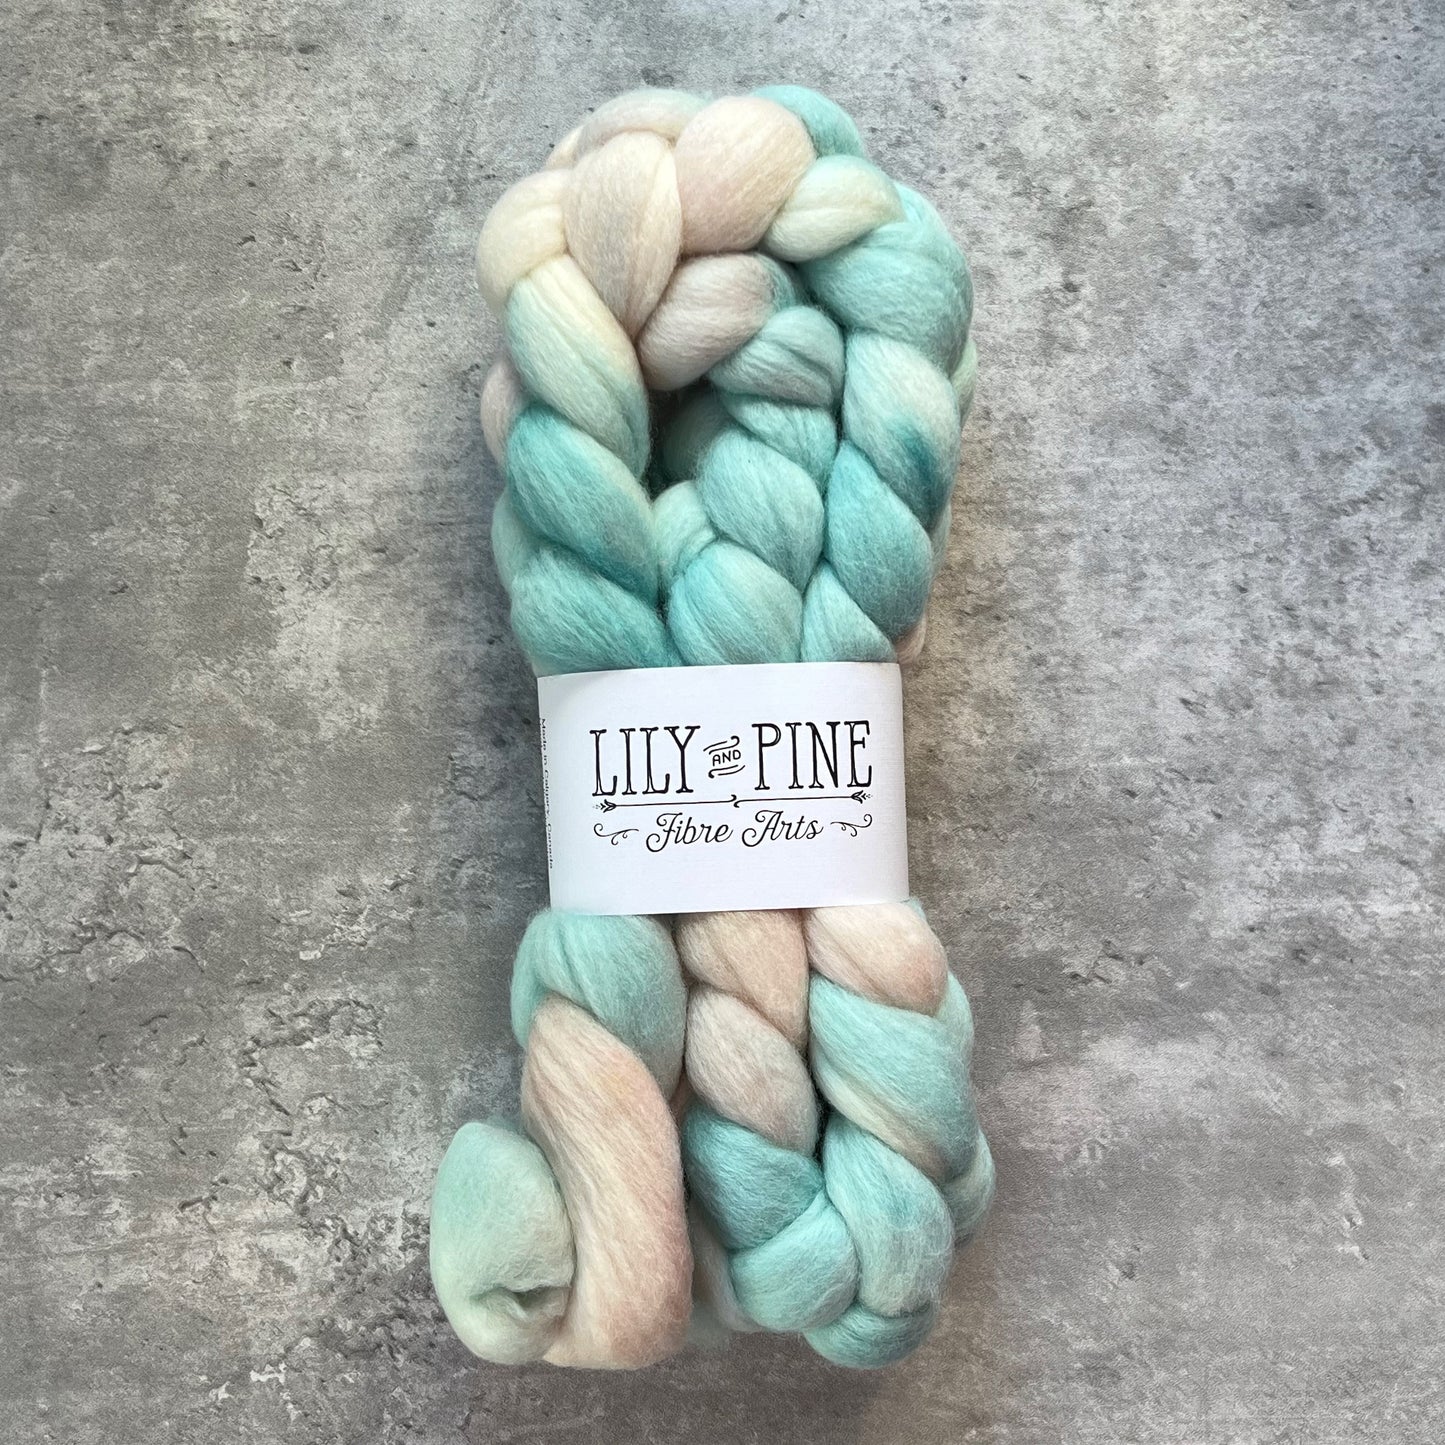 Lily & Pine 100% Merino Combed top- variegated